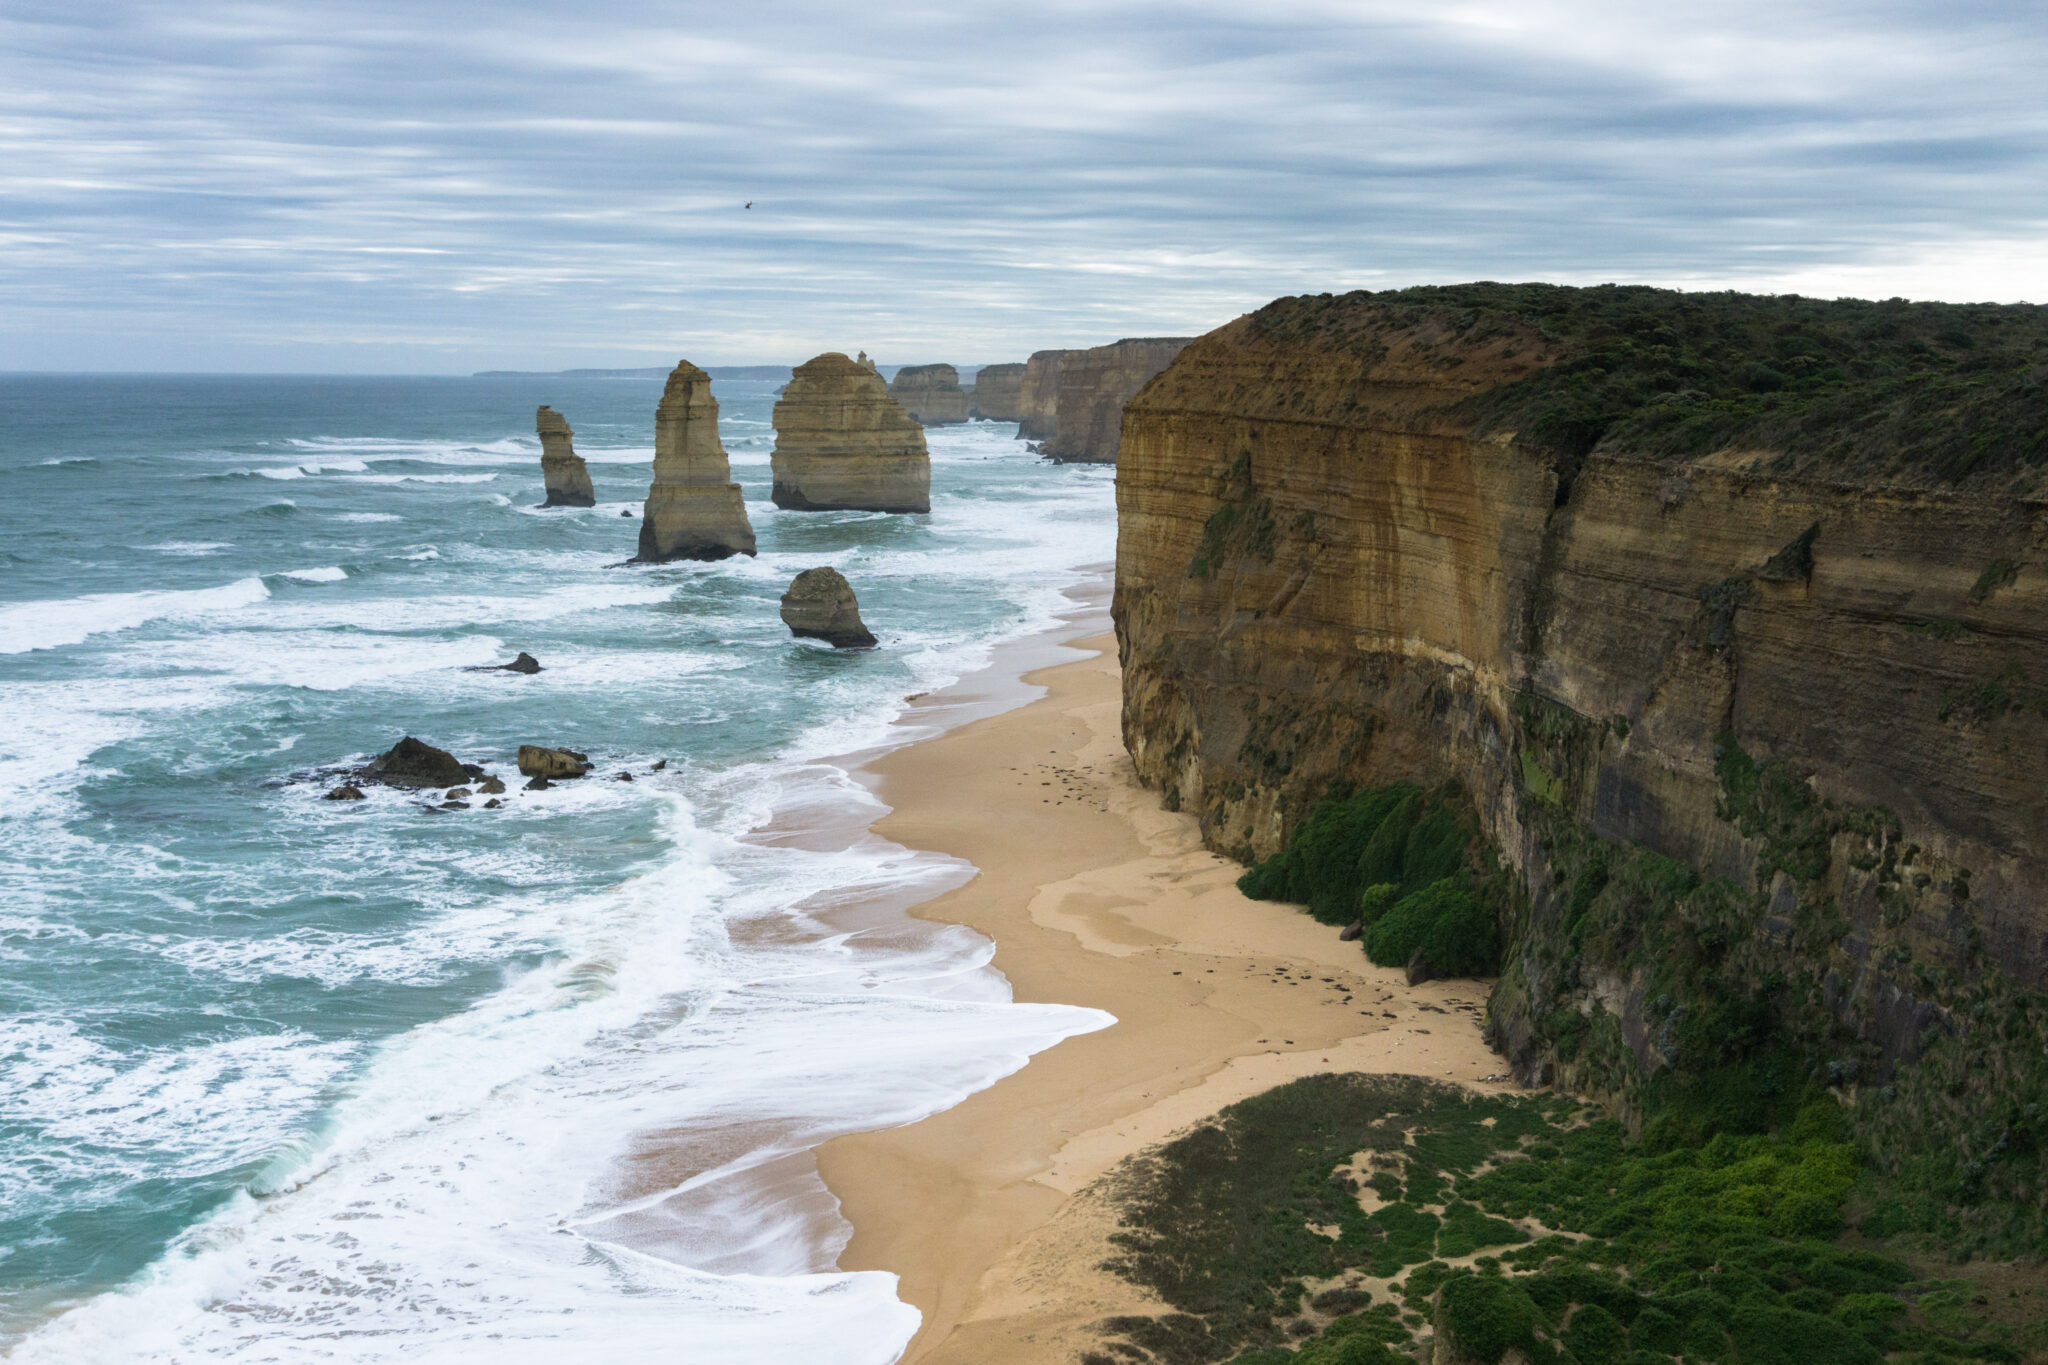 Everything you need to know to plan the best Adelaide to Melbourne Drive via the Great Ocean Road including where to go, how long to visit & where to stay. #adelaide #melbourne #australiaroadtrip #southaustralia #roadtripitinerary #bestroadtrips #greatoceanroad #kangarooisland.